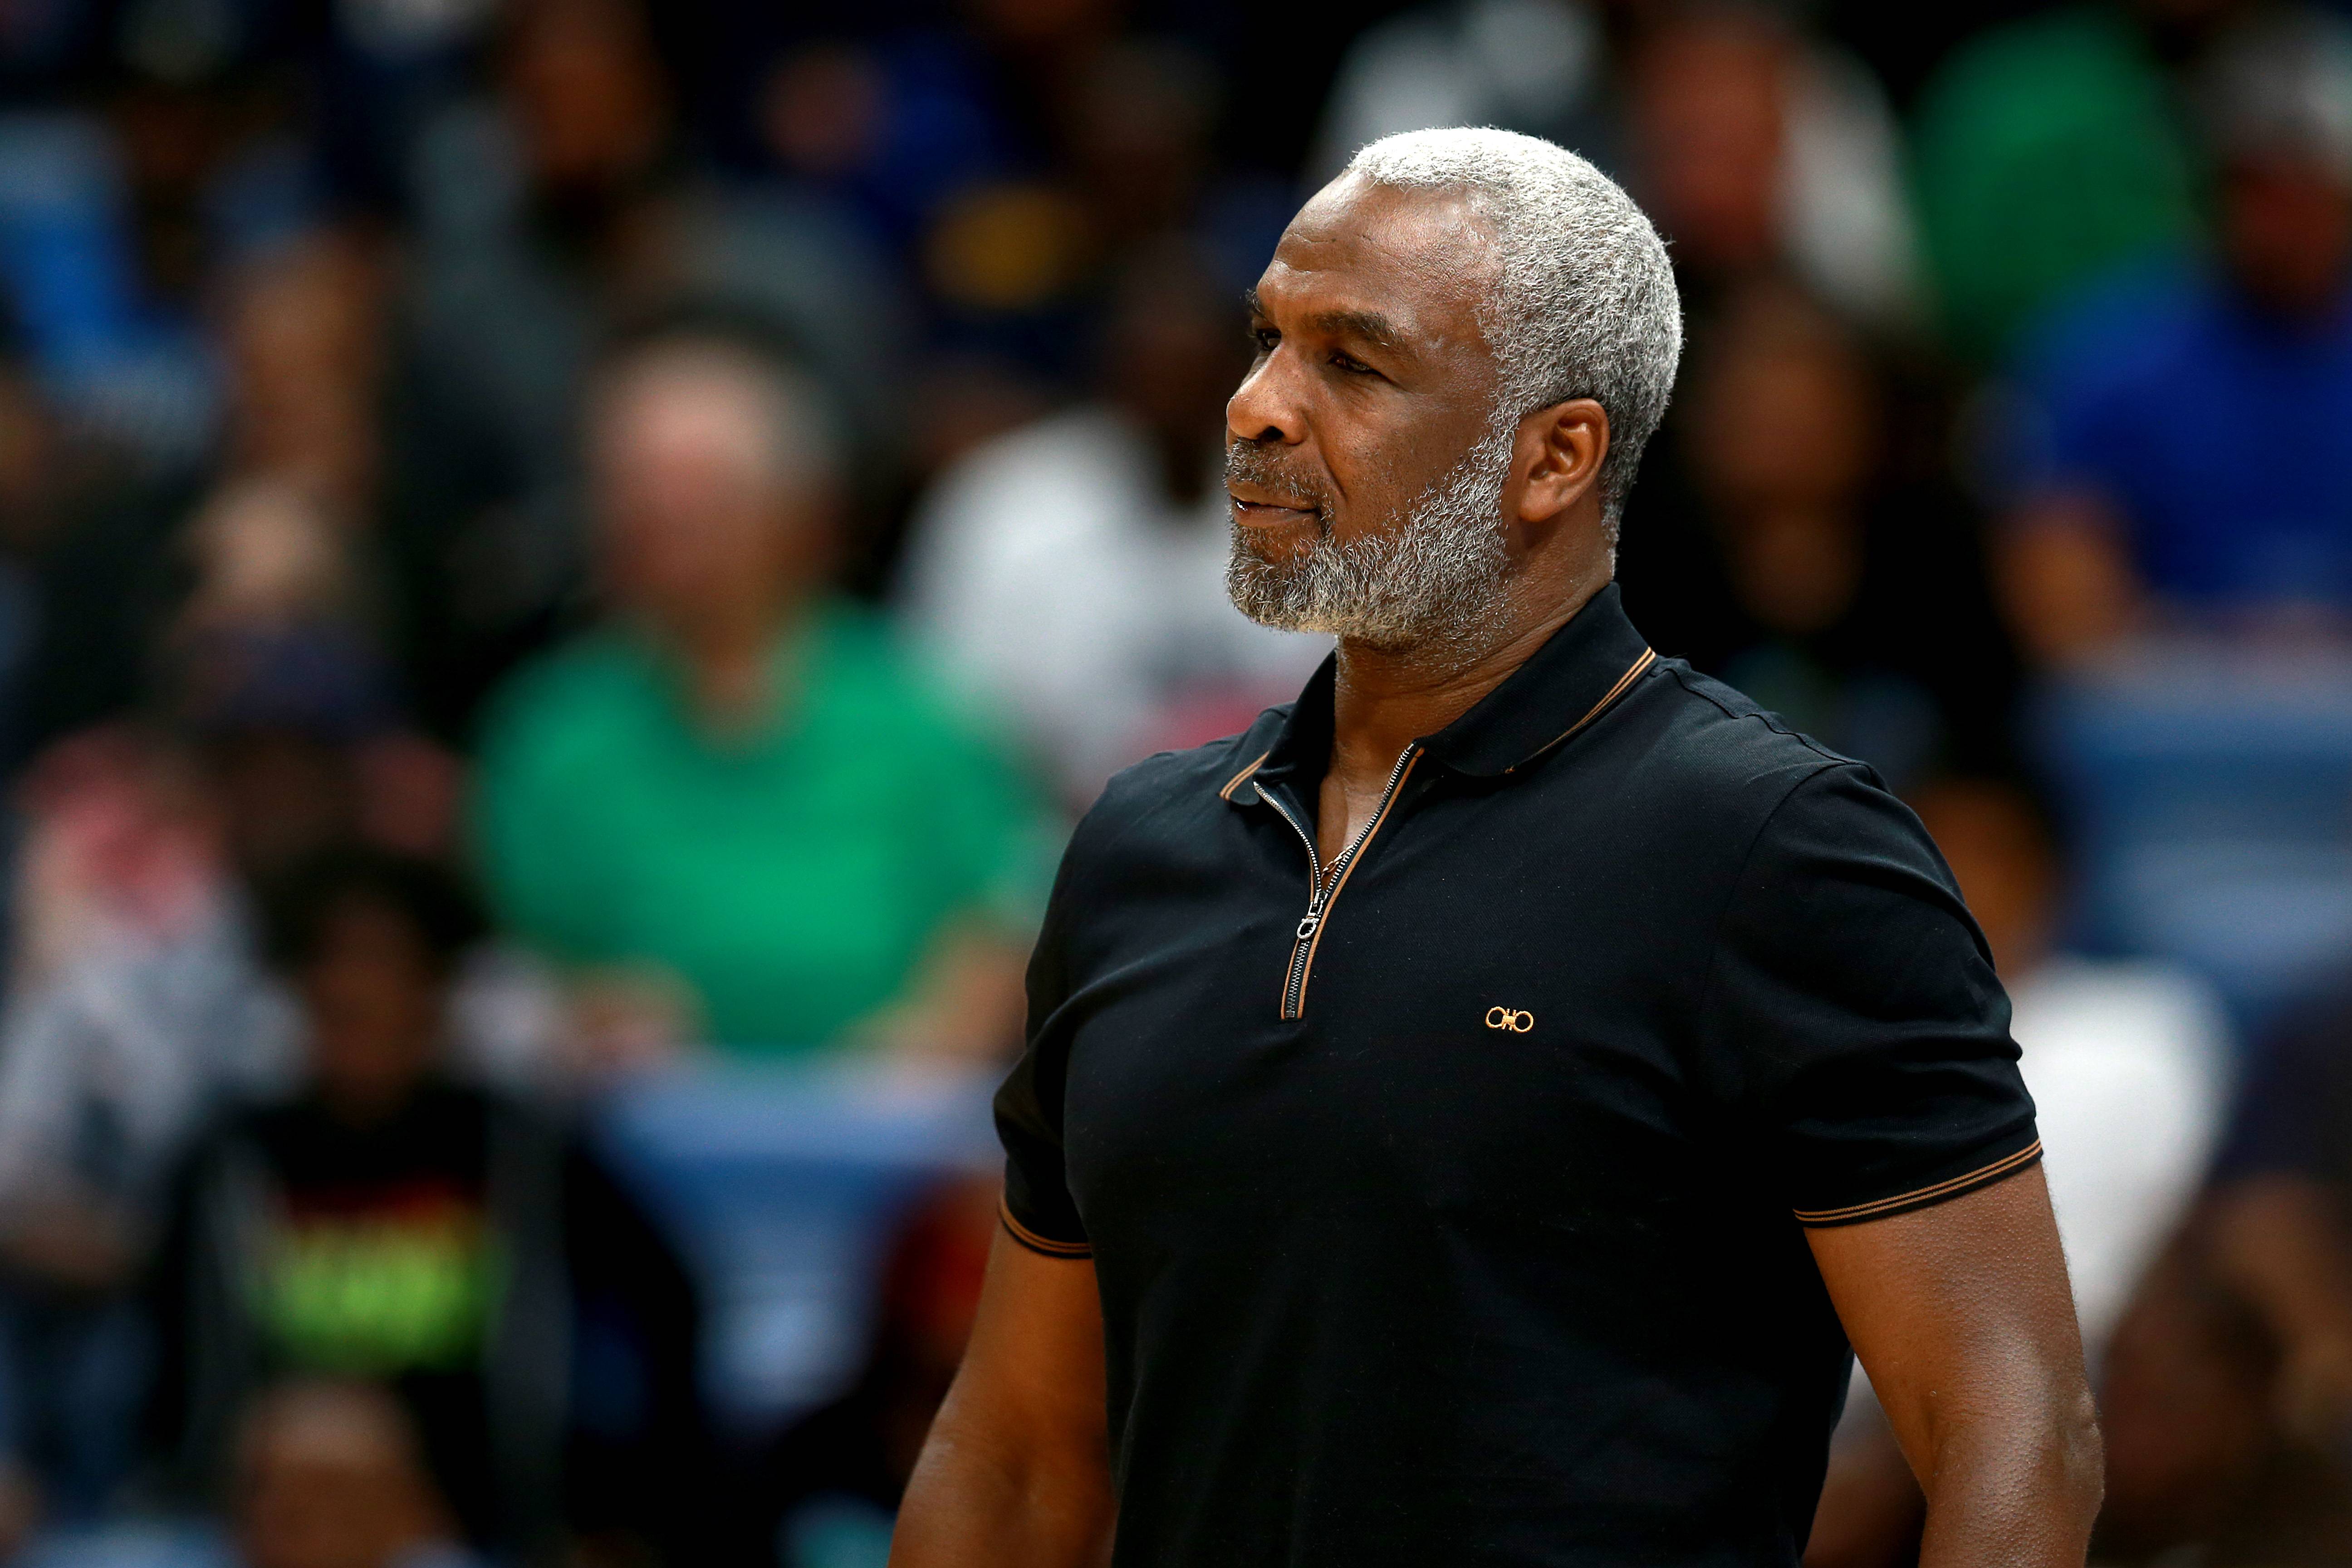 NEW ORLEANS, LOUISIANA - AUGUST 25: Killer 3s head coach Charles Oakley looks on during the BIG3 Playoffs at Smoothie King Center on August 25, 2019 in New Orleans, Louisiana. (Photo by Sean Gardner/BIG3 via Getty Images)